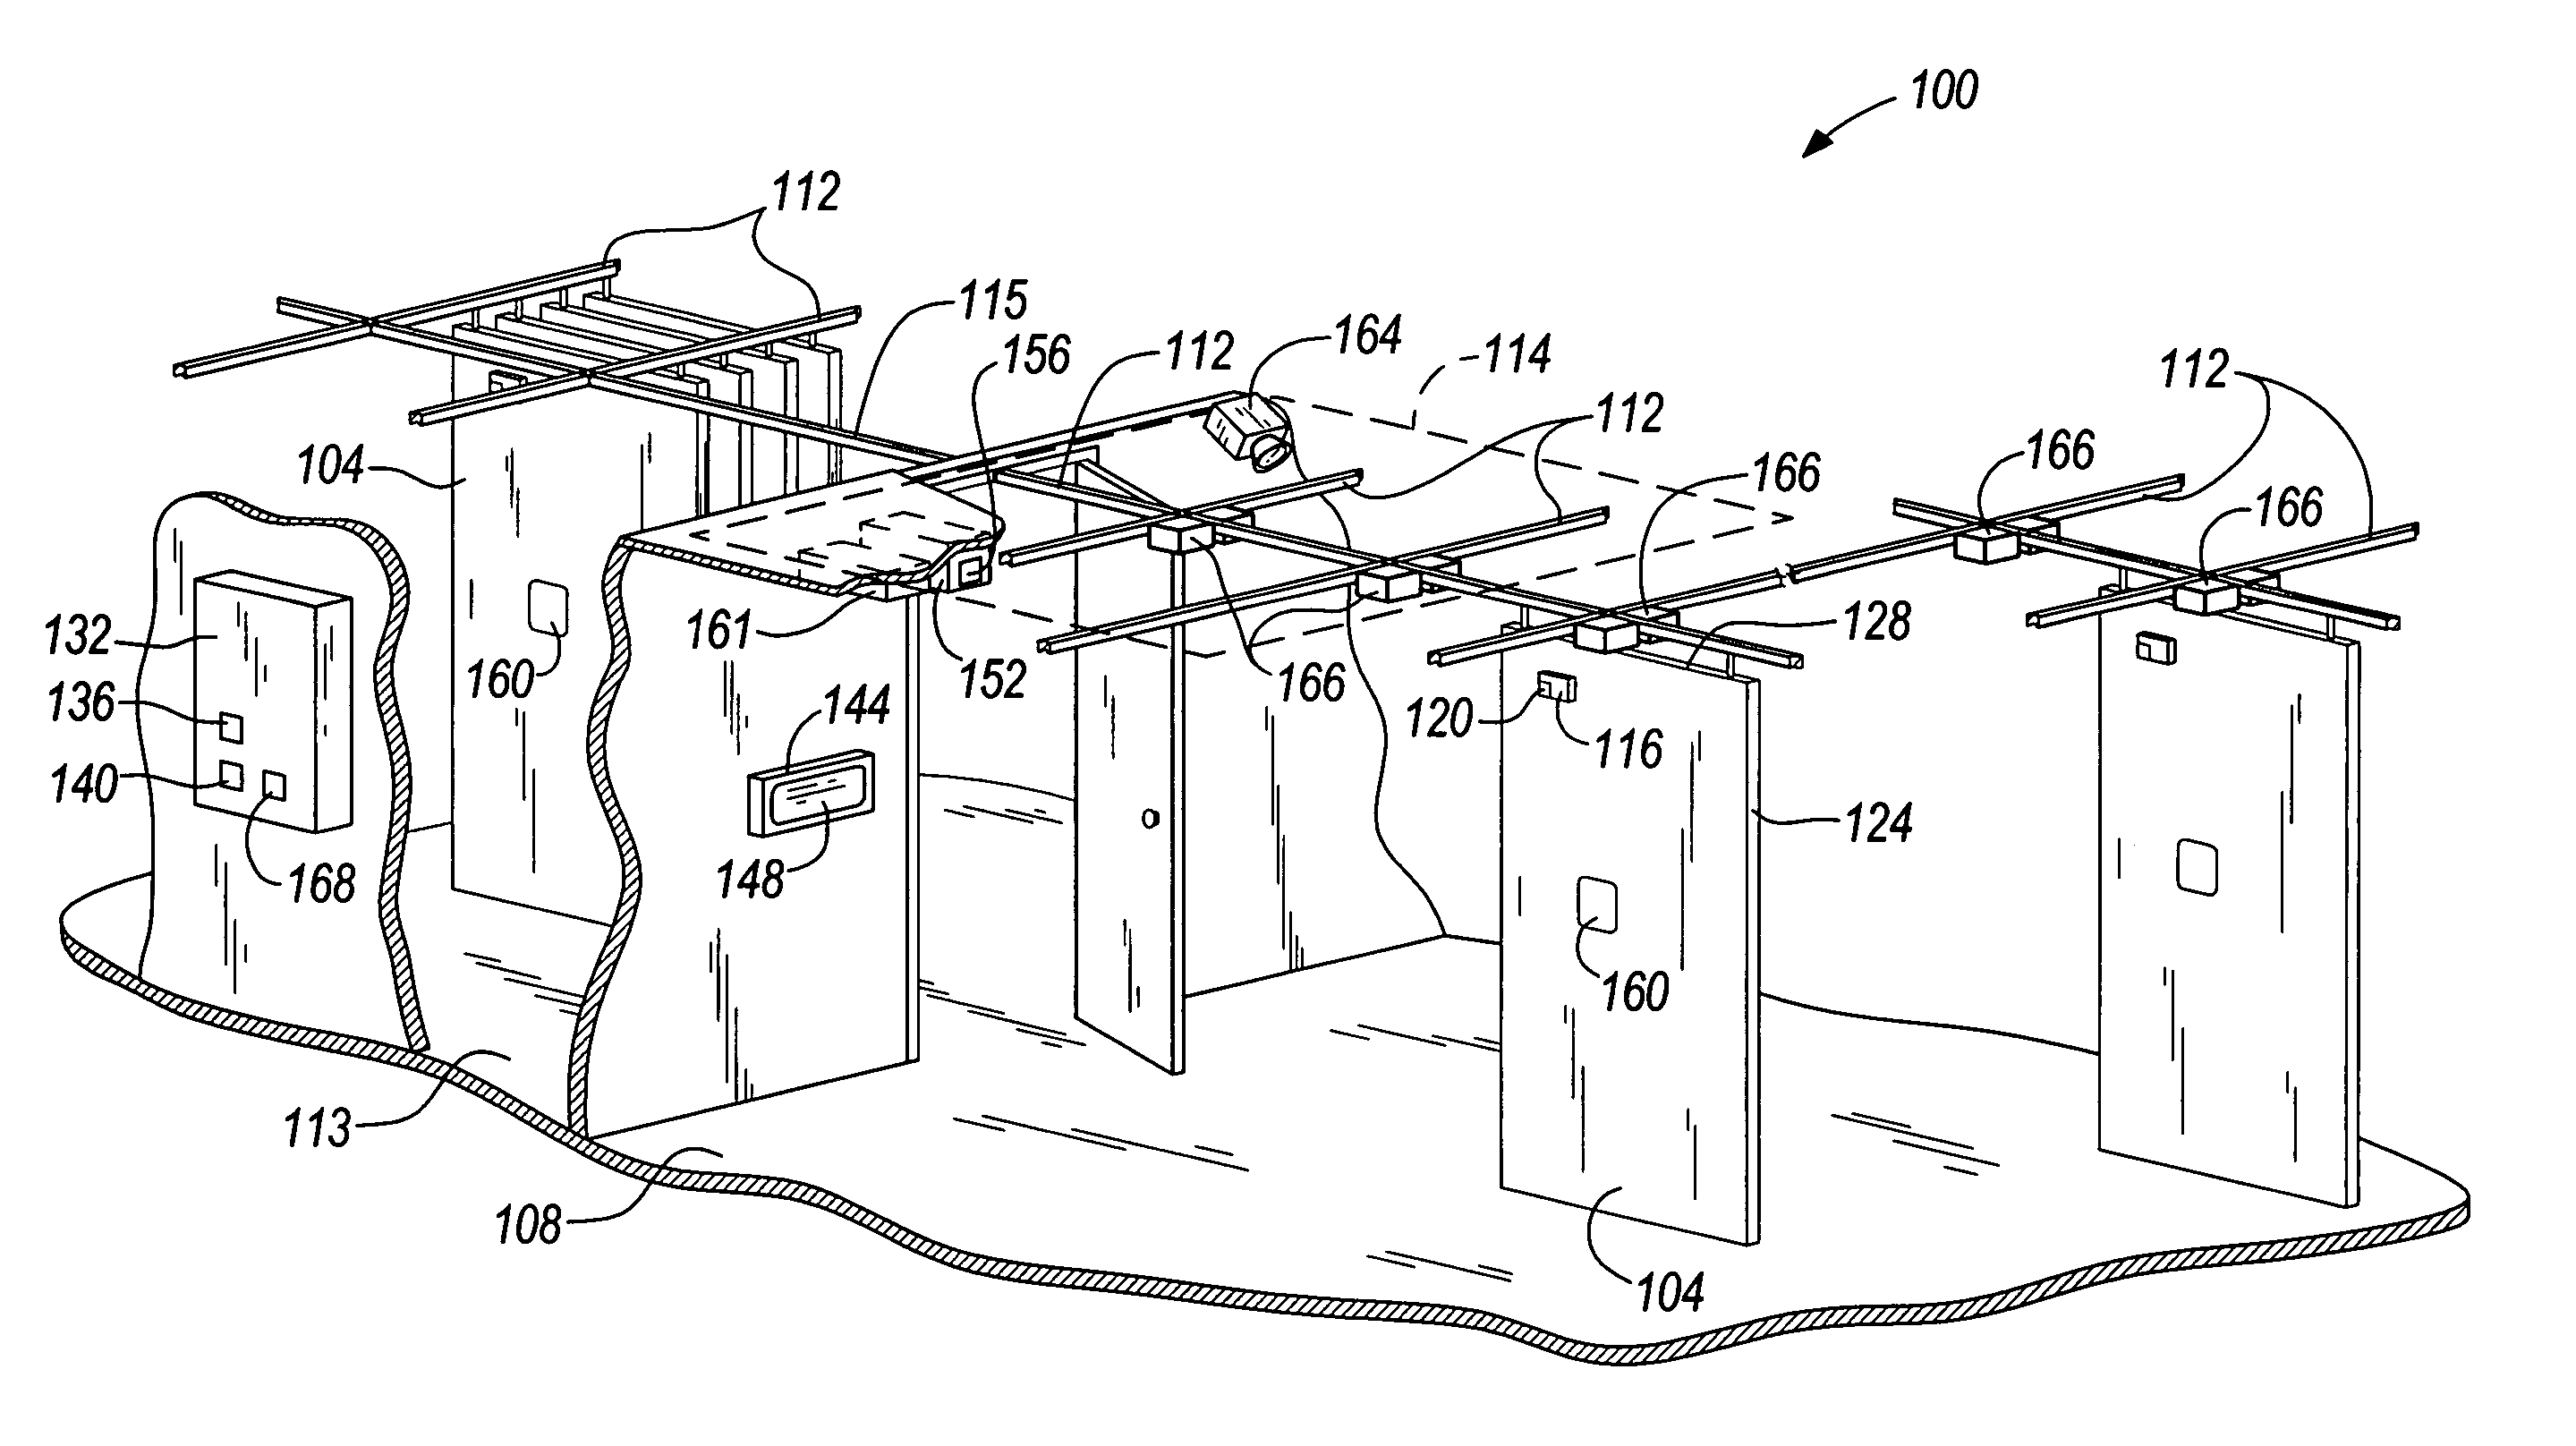 Flexible space management system and method